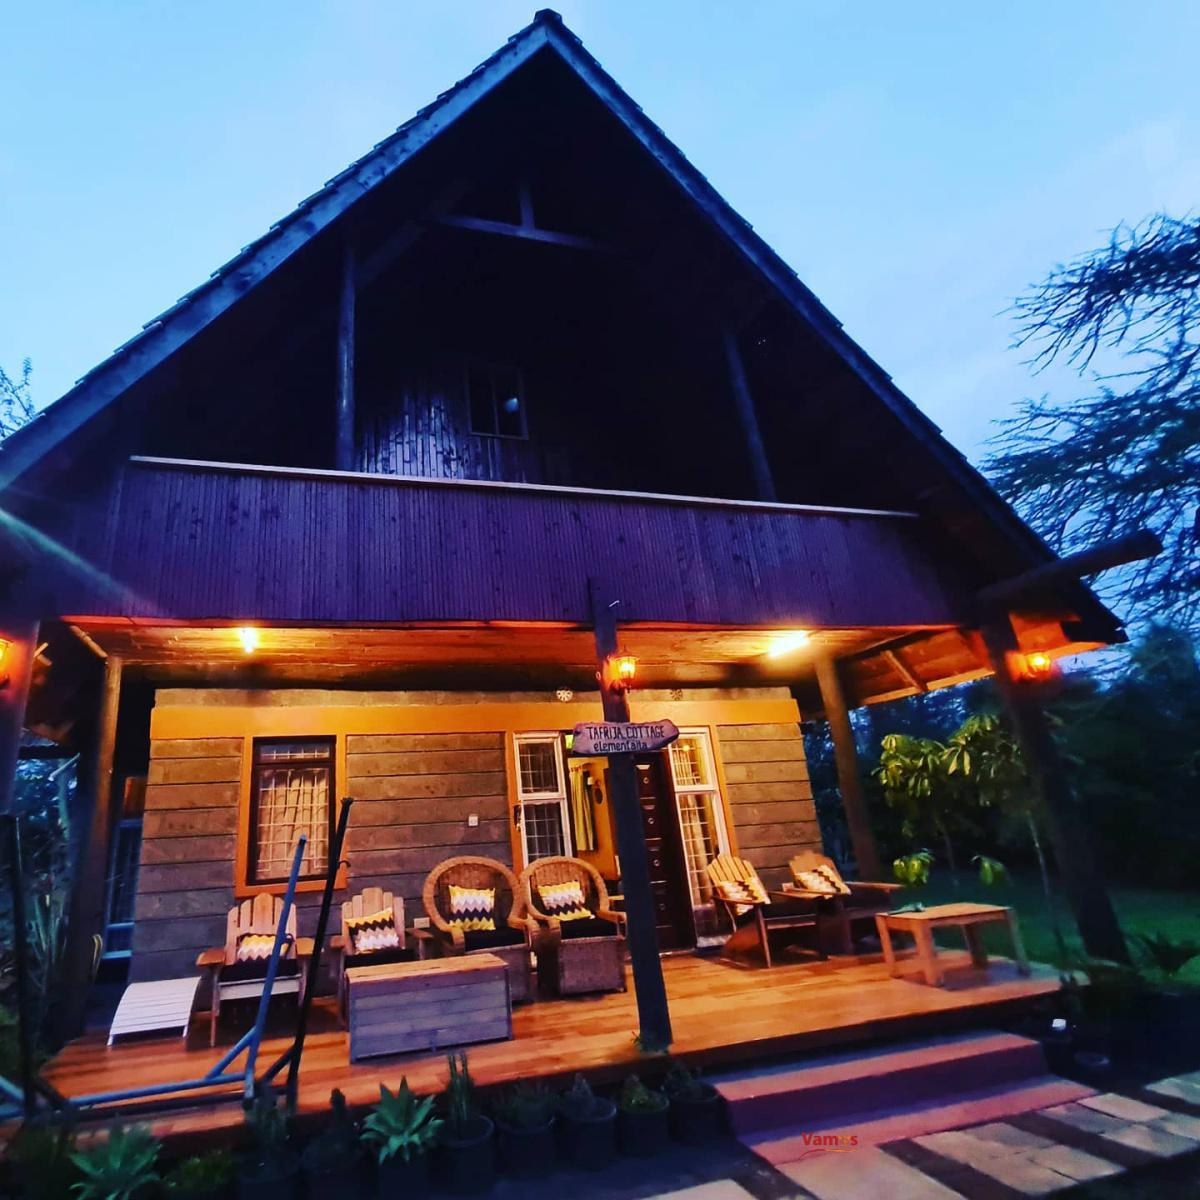 Tuliza Experience: Rustic Cottages near Lake Elementaita from 2159 PP